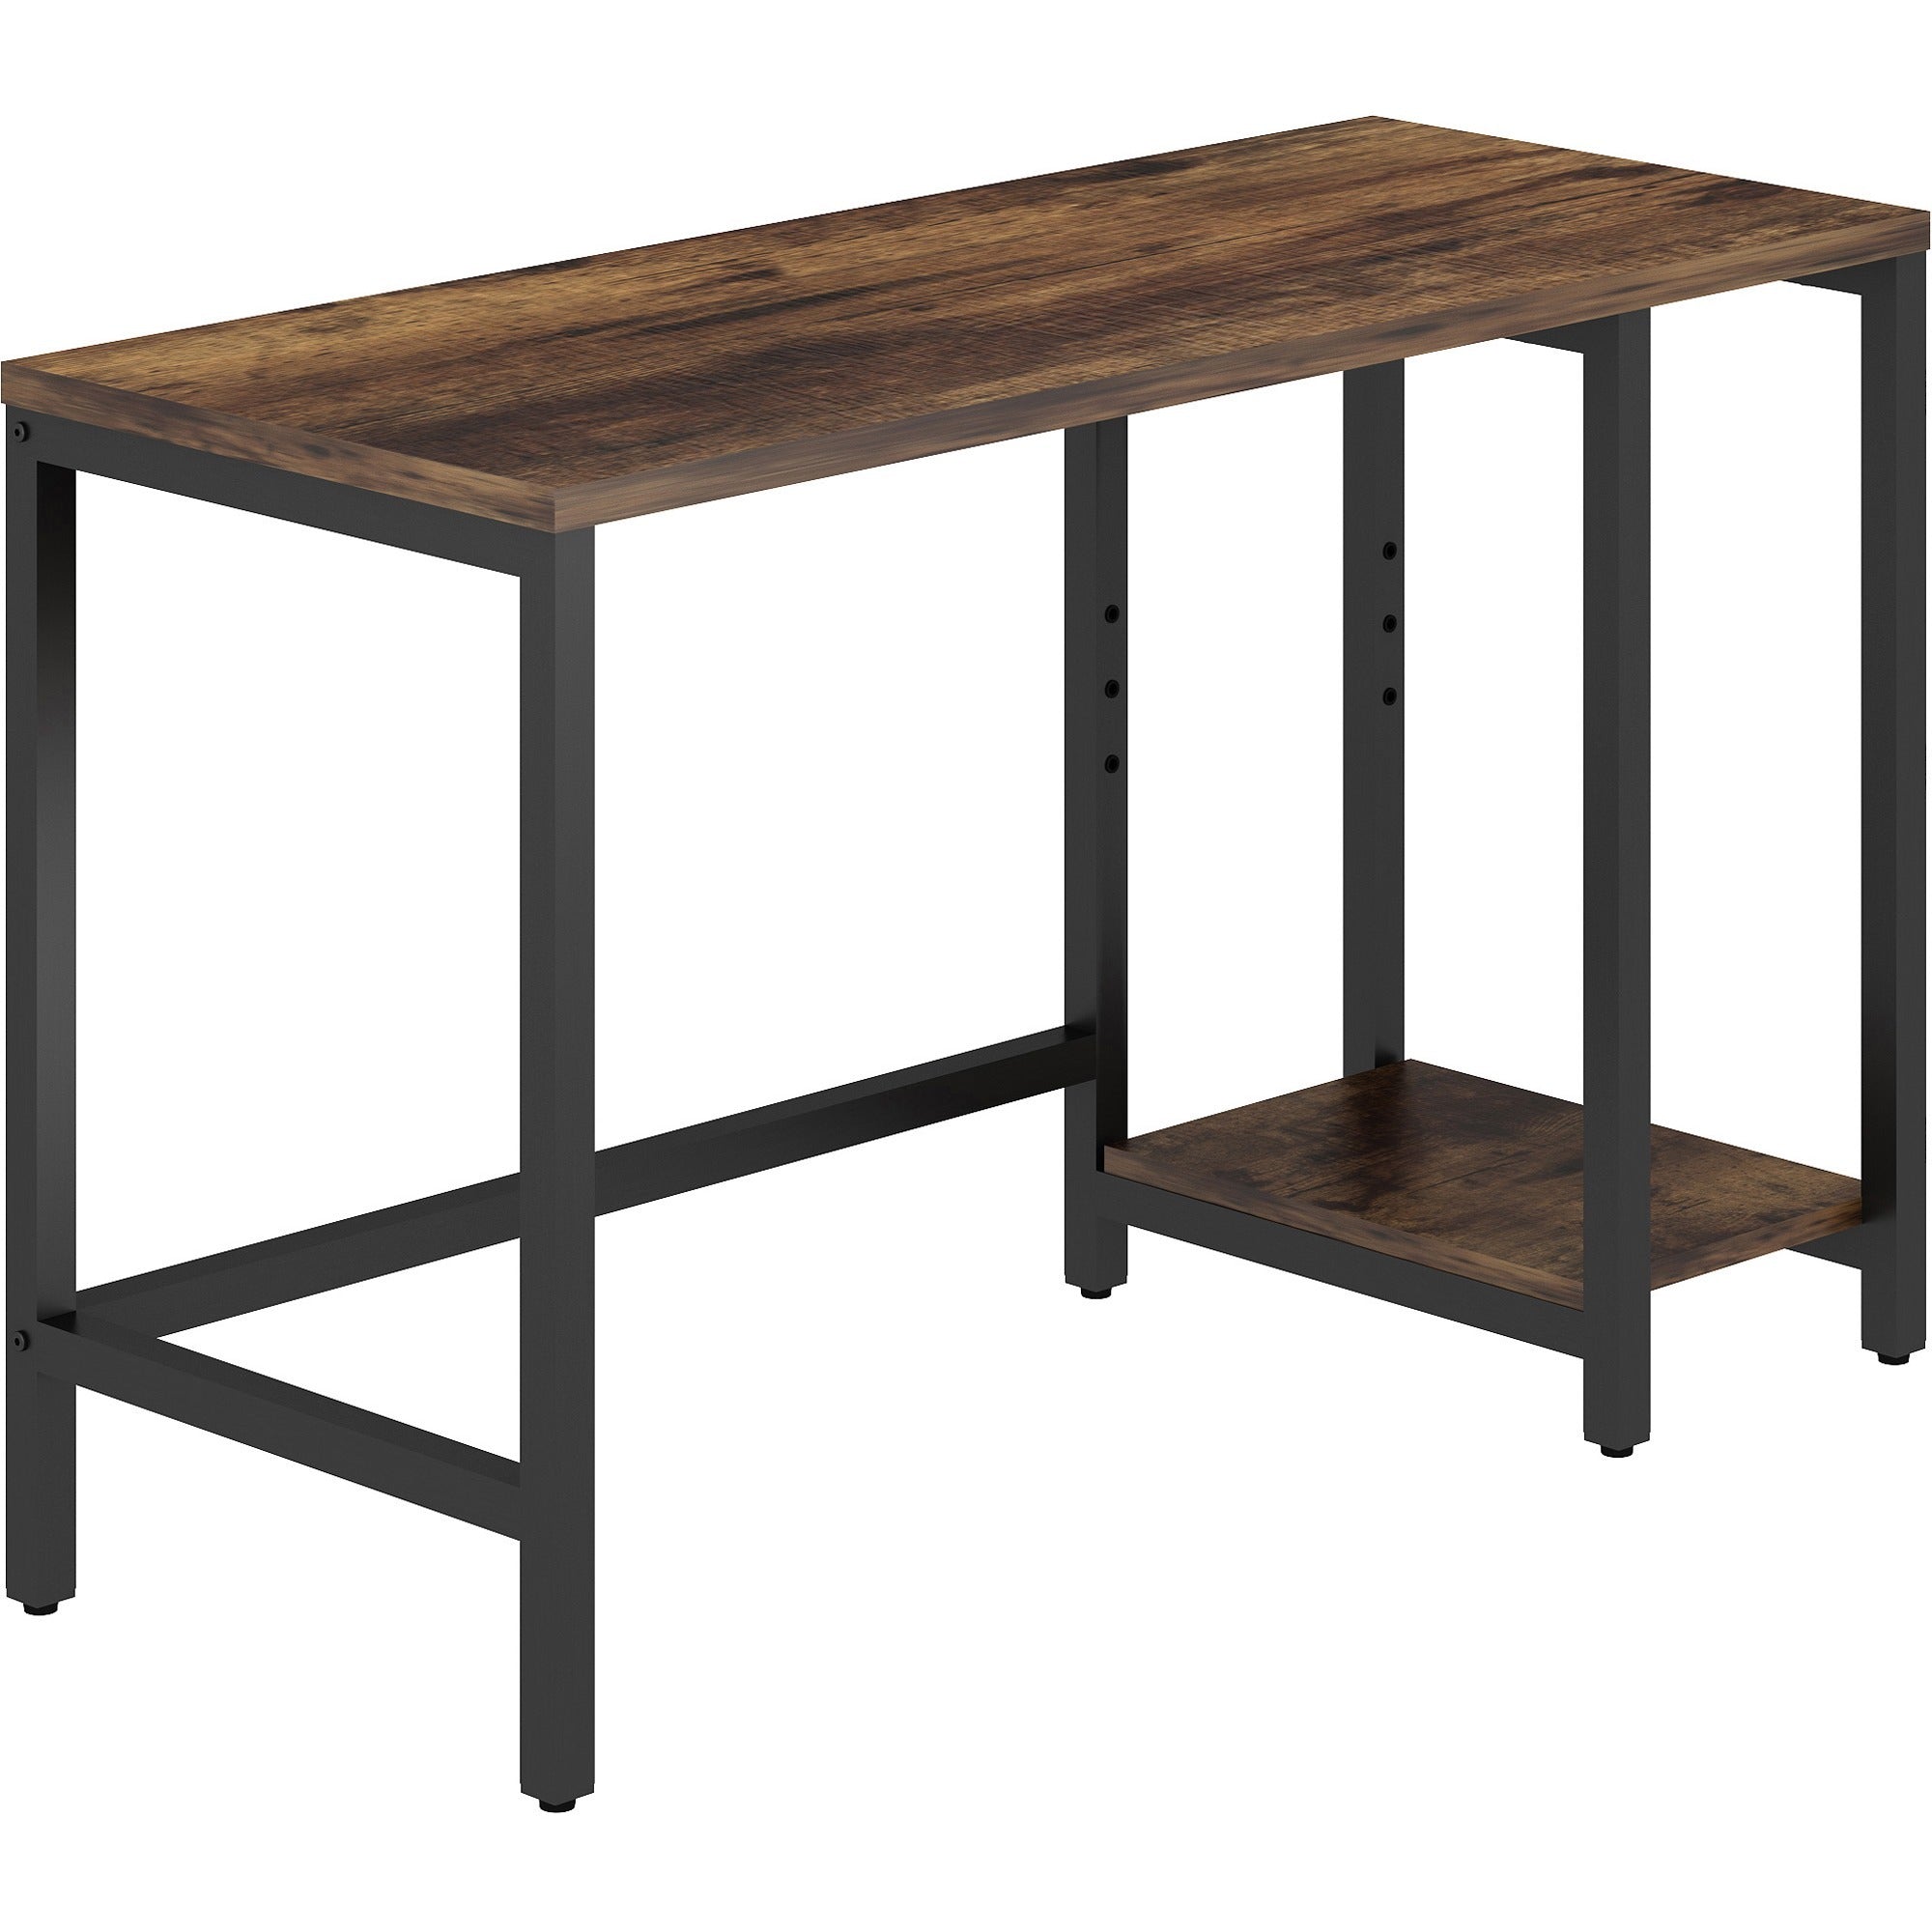 NuSparc Metal Frame Desk - For - Table TopVintage Oak, Black Top - Contemporary Style - 220 lb Capacity x 47.20" Table Top Width x 19.70" Table Top Depth x 1" Table Top Thickness - 29.50" Height - Assembly Required - High Pressure Laminate (HPL) Top - 1